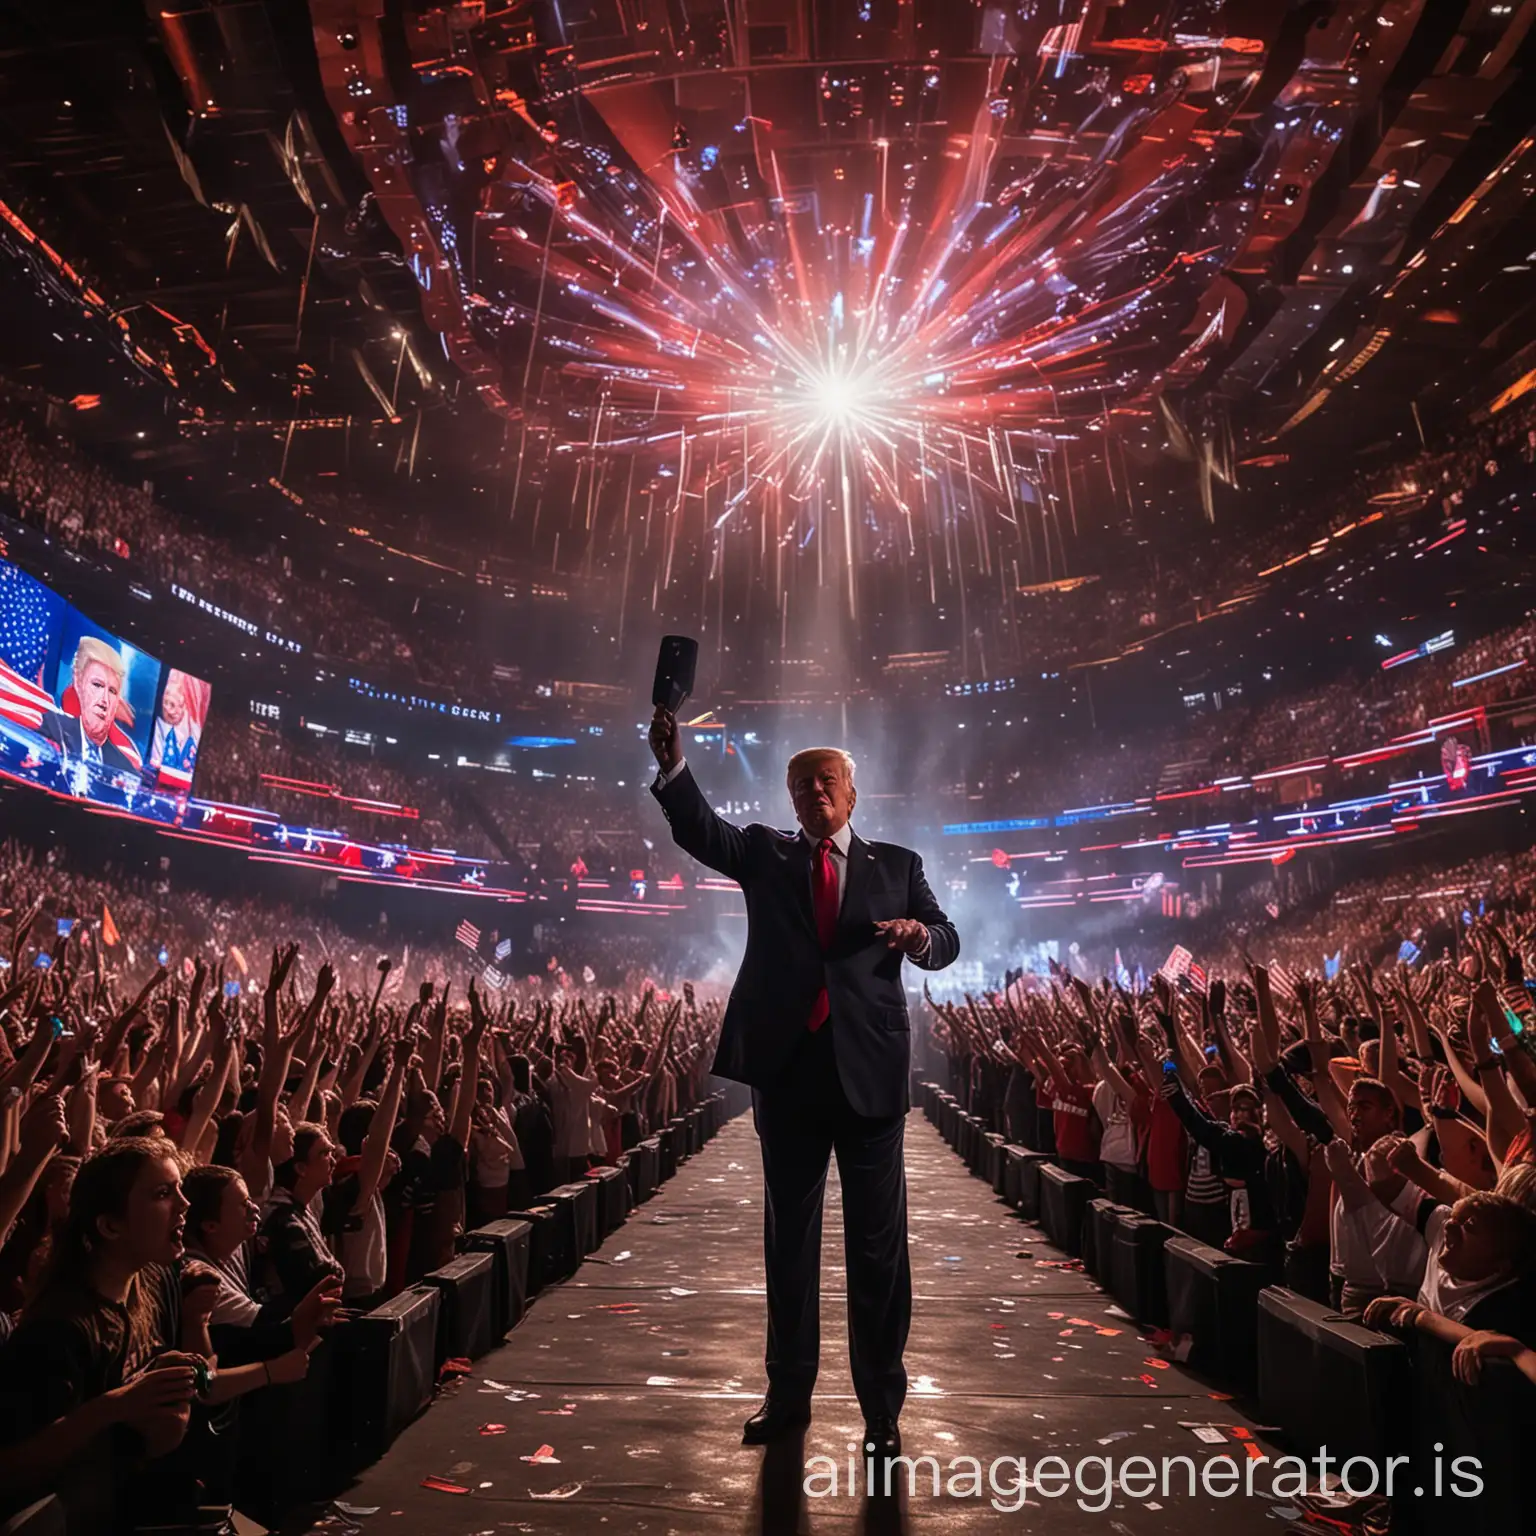 An extravagant stage design: A grand and magnificent arena with a futuristic, digital background. In the center of the stage stands an energetic and charismatic Donald Trump. Trump is dressed in shiny armor, holding a microphone in one hand and raising the other triumphantly. Bright spotlights illuminate Trump, while the background features holographic charts and symbols representing the cryptocurrency world. The crowd is filled with enthusiastic people, cheering and waving glow sticks. The atmosphere is electrifying, capturing the excitement of the election.